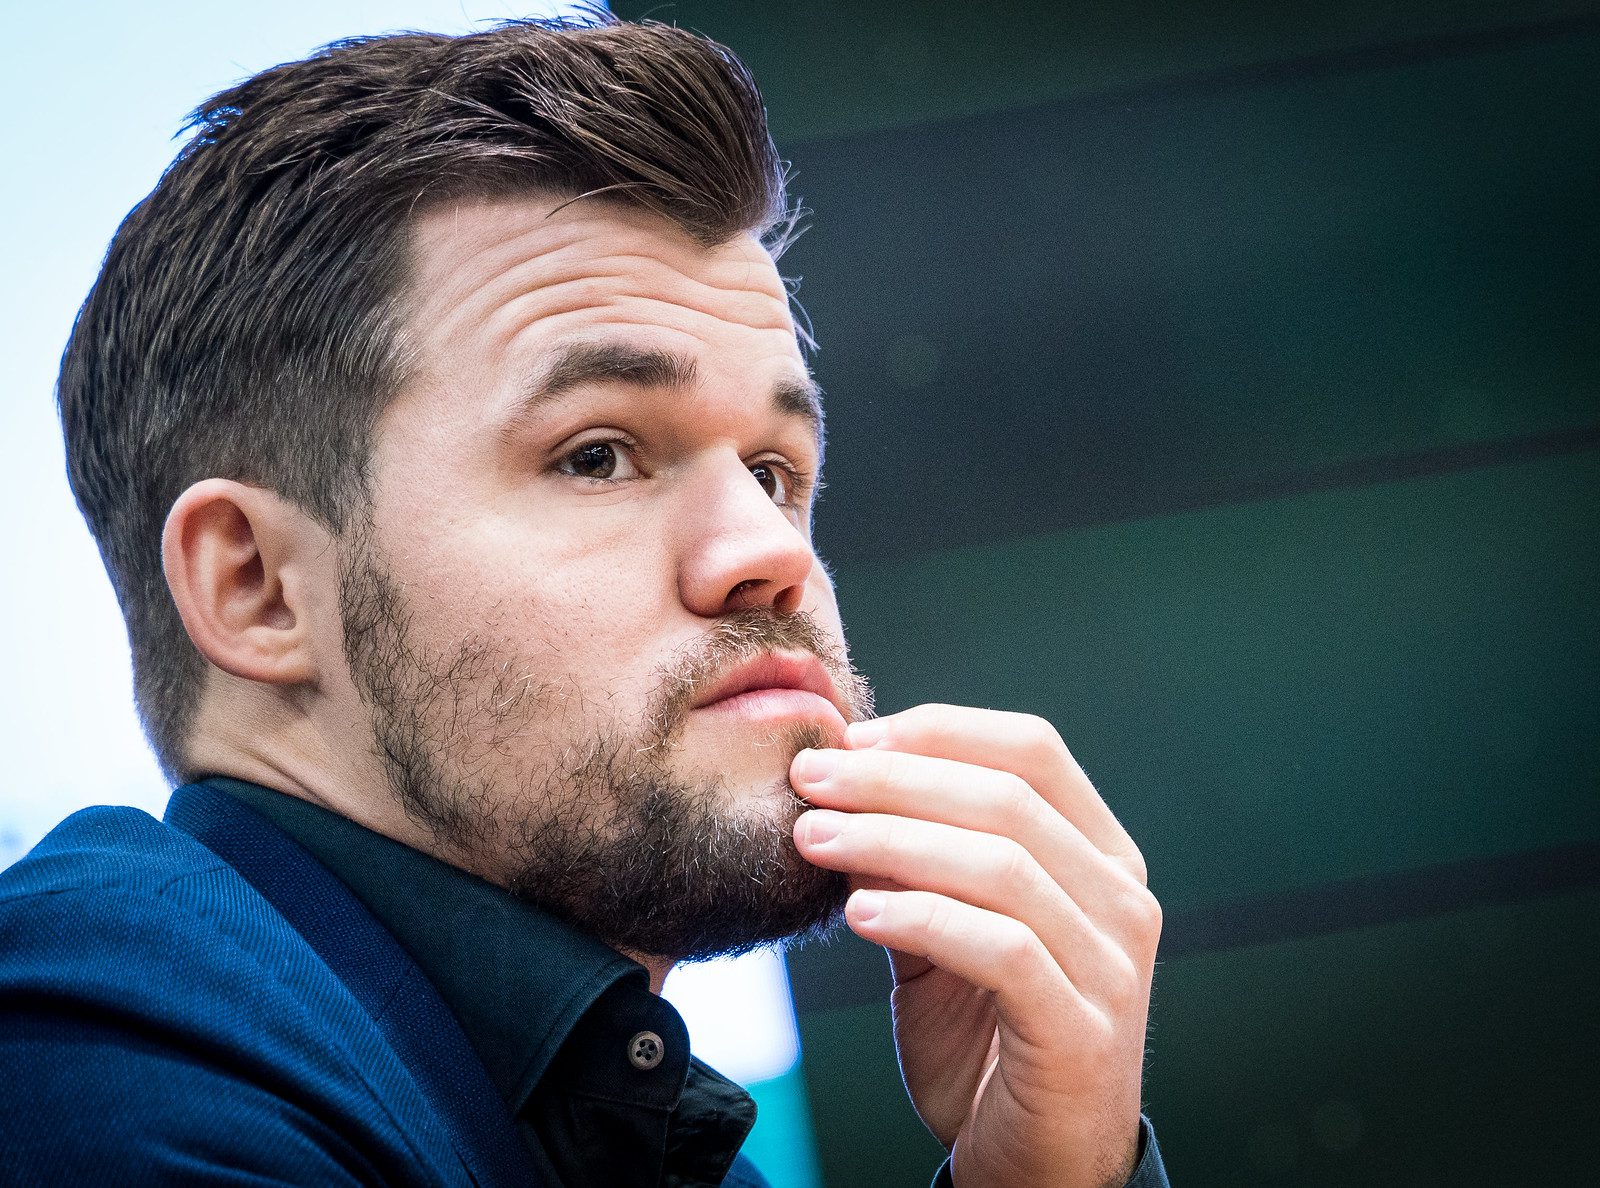 The big controversy in the game of Magnus Carlsen and Alireza Firouzja at  the World Blitz 2019 